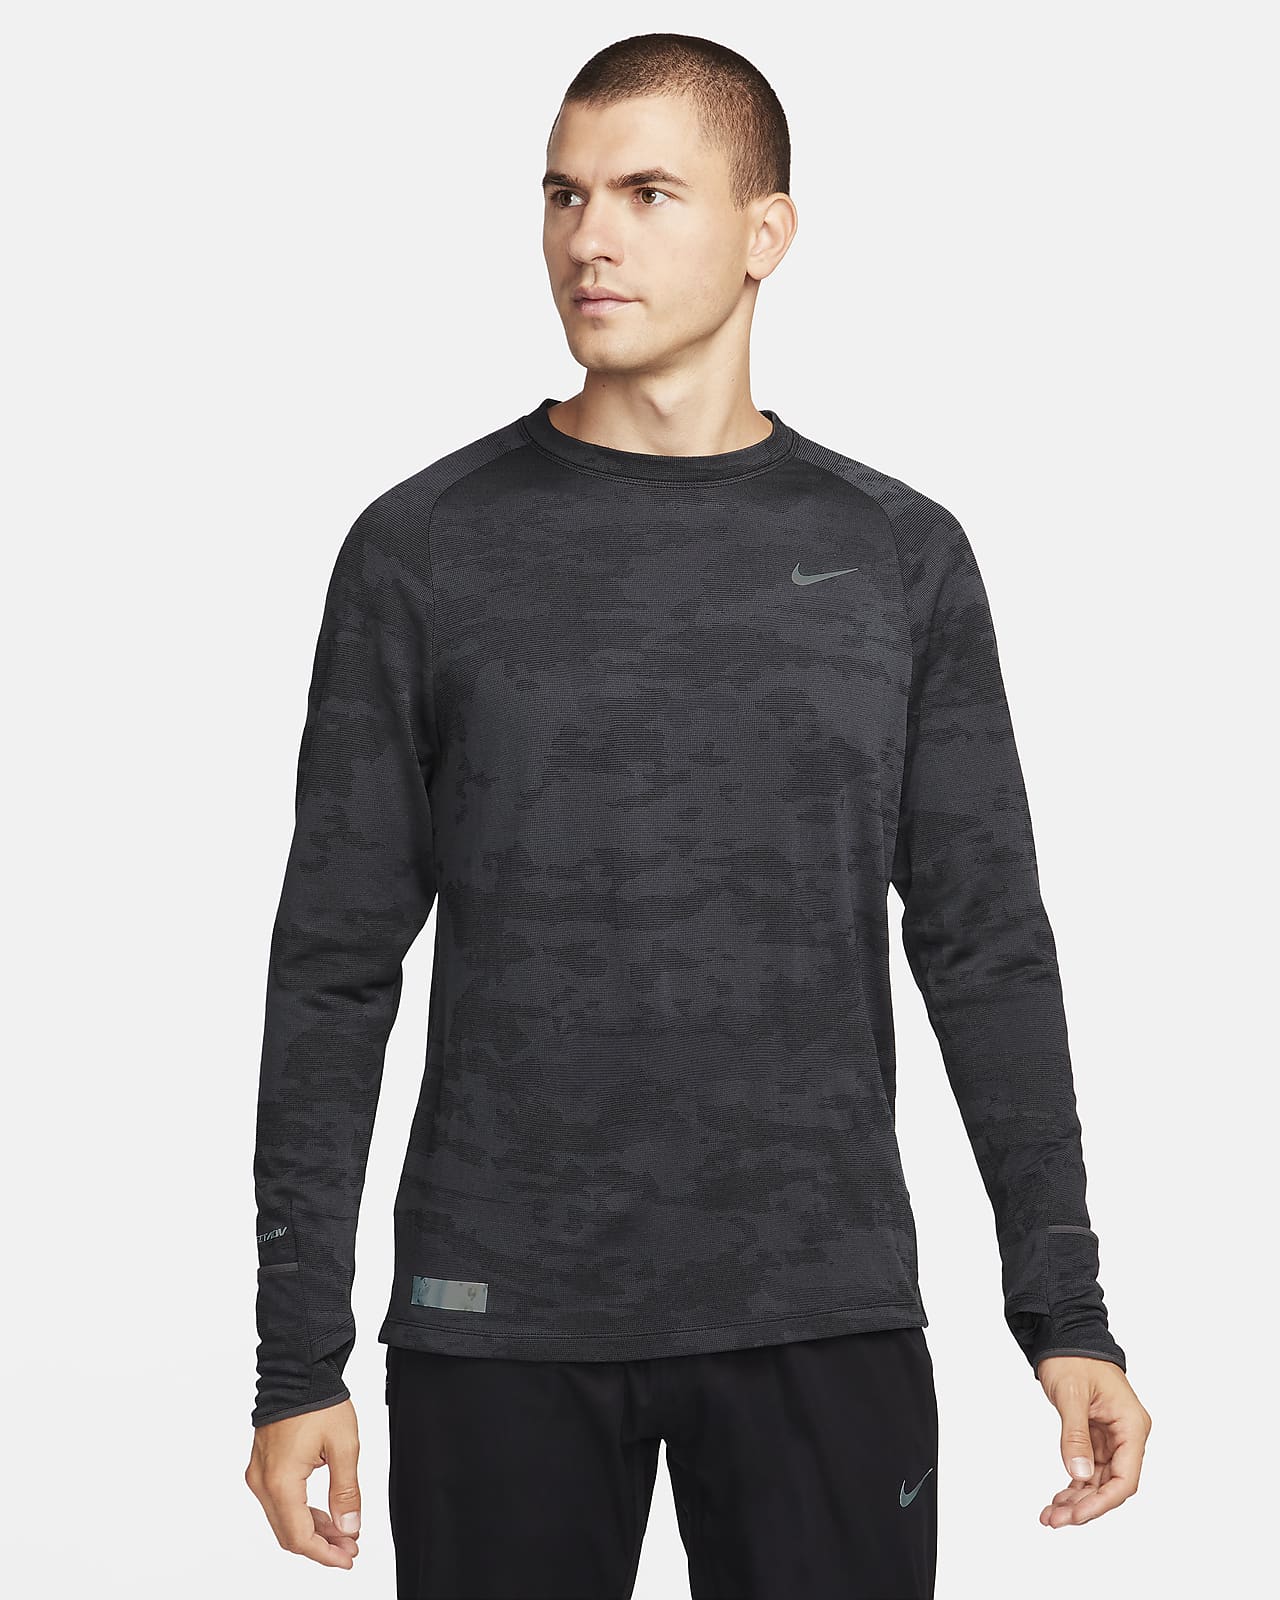 Nike Therma-FIT ADV Running Division Men's Long-Sleeve Running Top